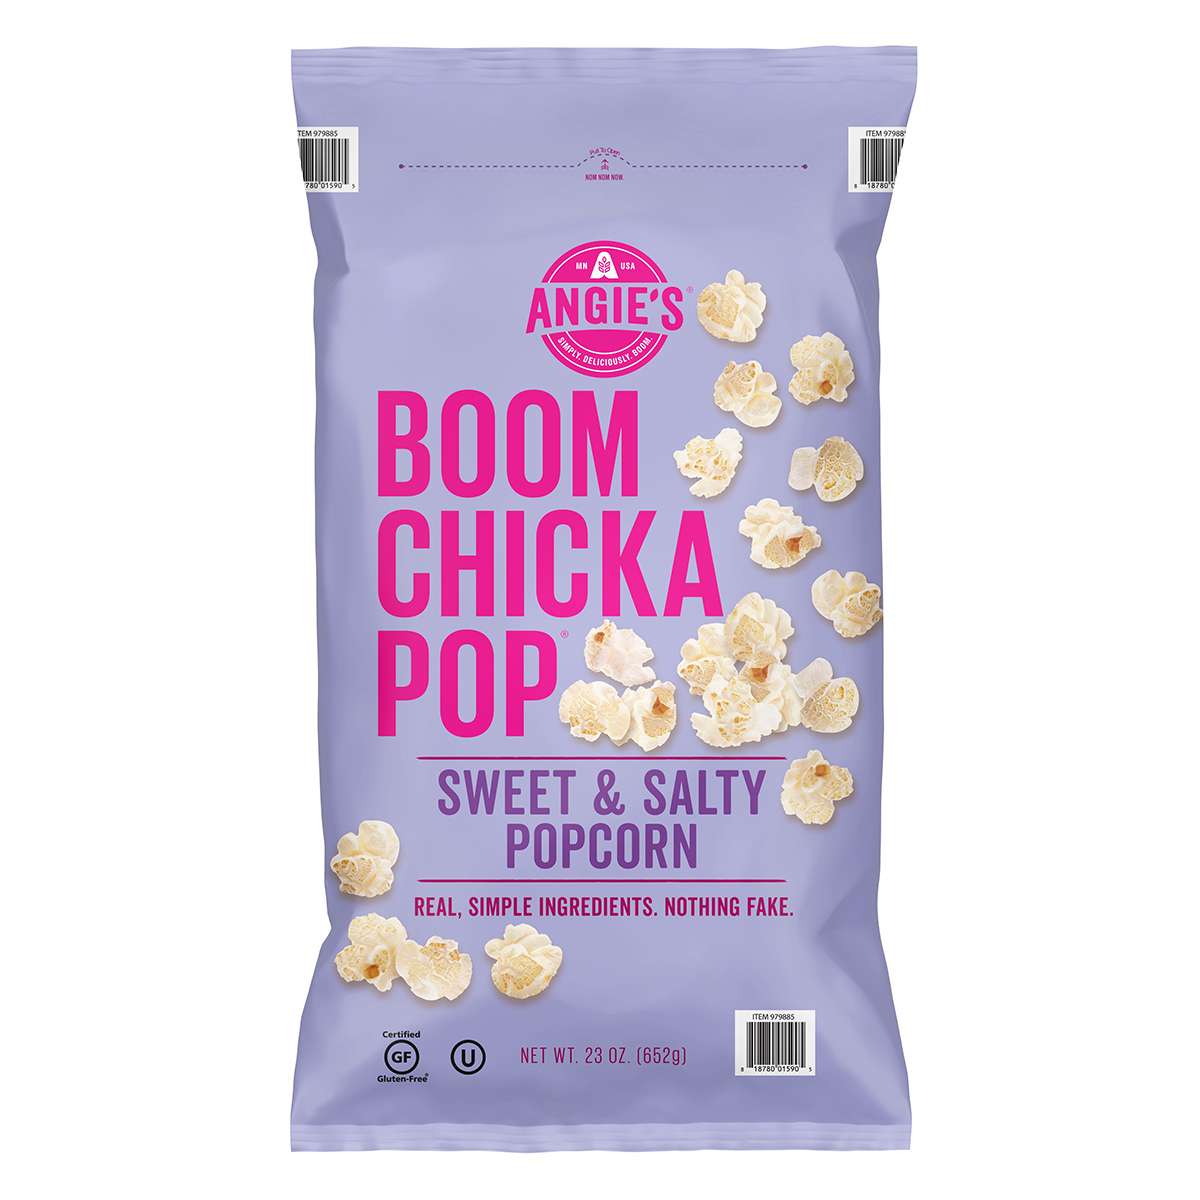 BOOM CHICKA POP 652g Sweet and Salty Popcorn